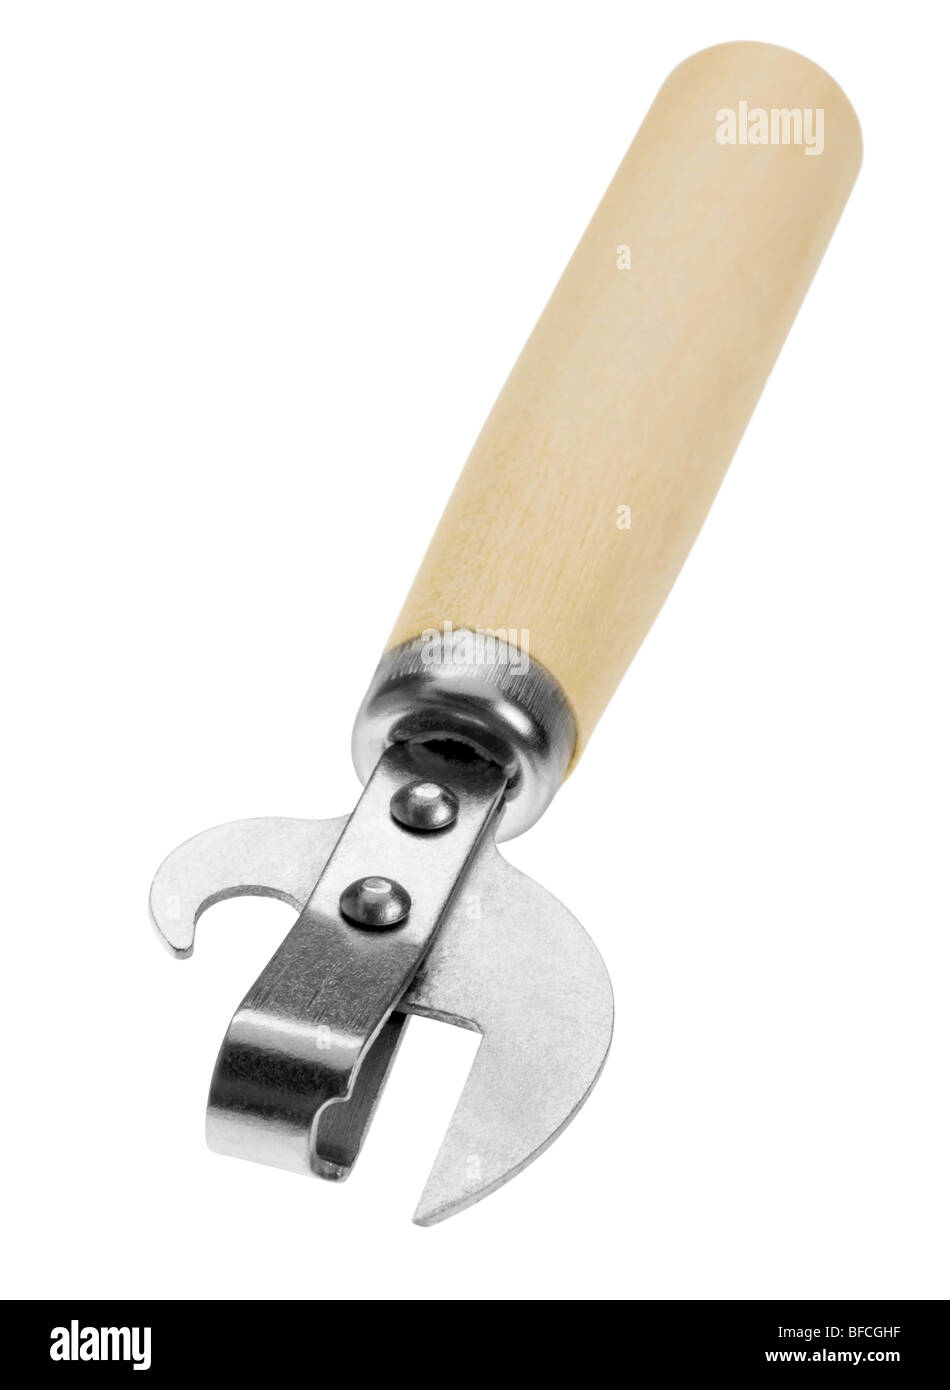 Metal opener preserves with wood handle on white Stock Photo